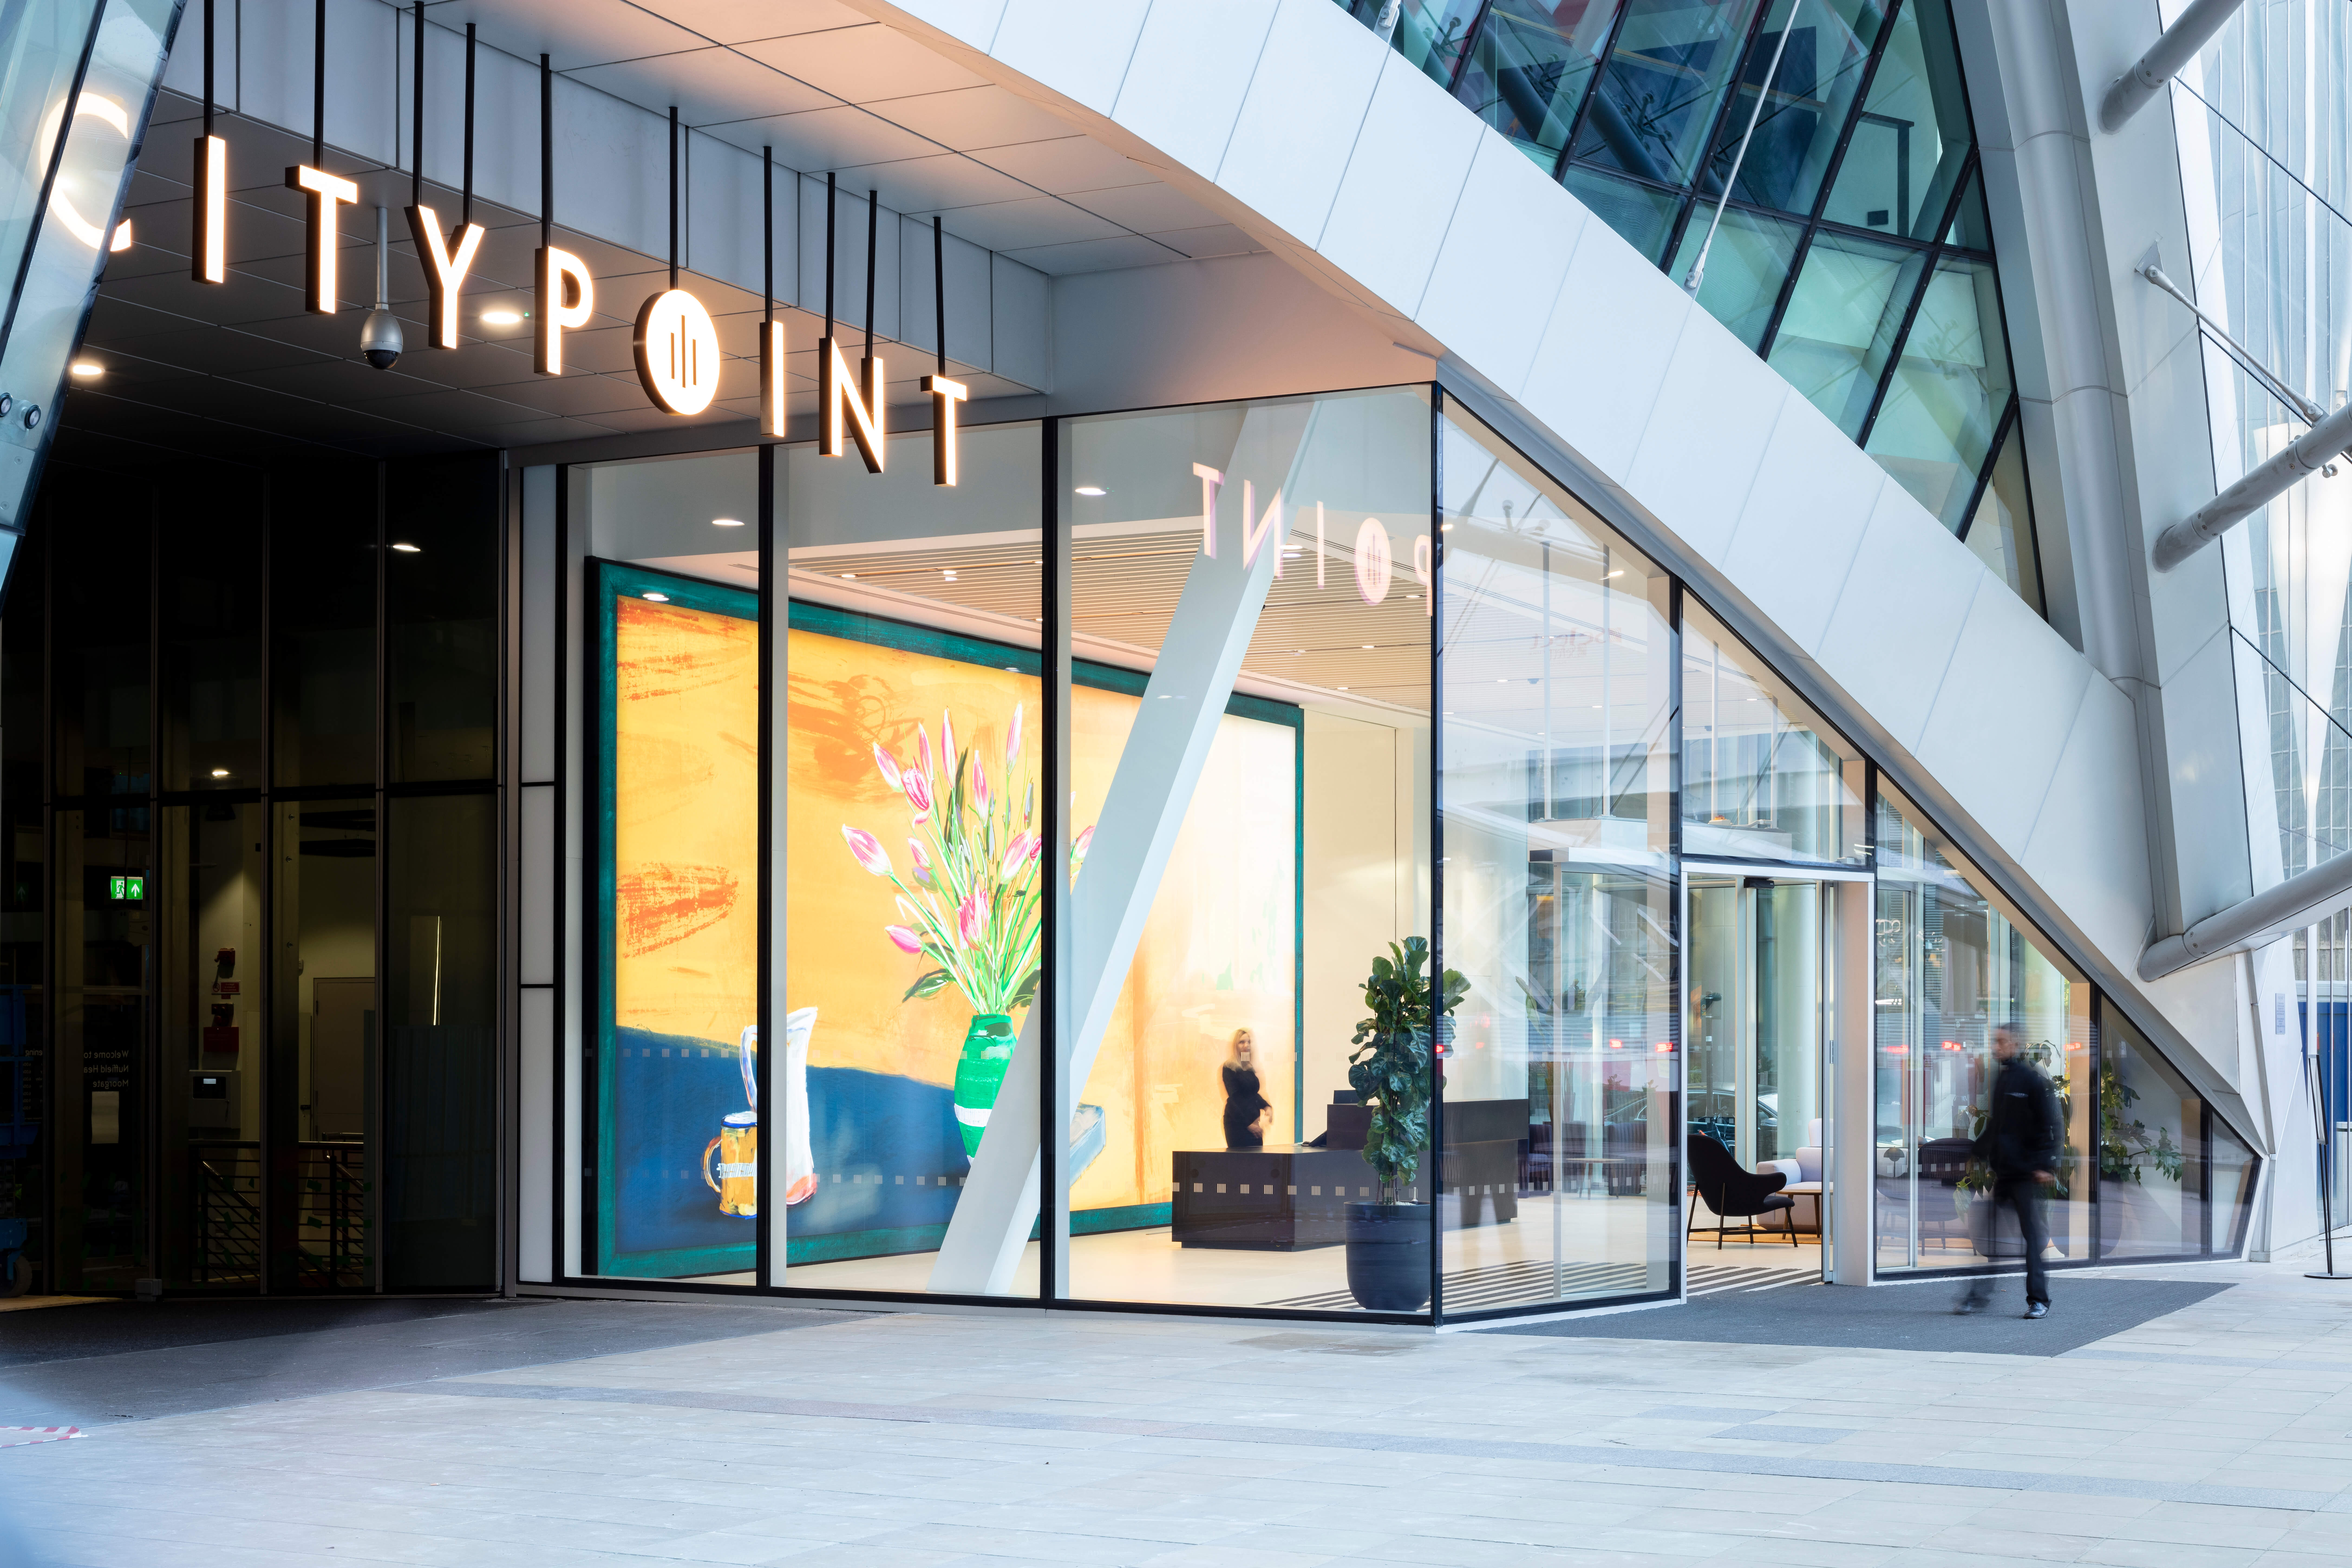 Citypoint - front entrance glass doors and windows with Citypoint signage